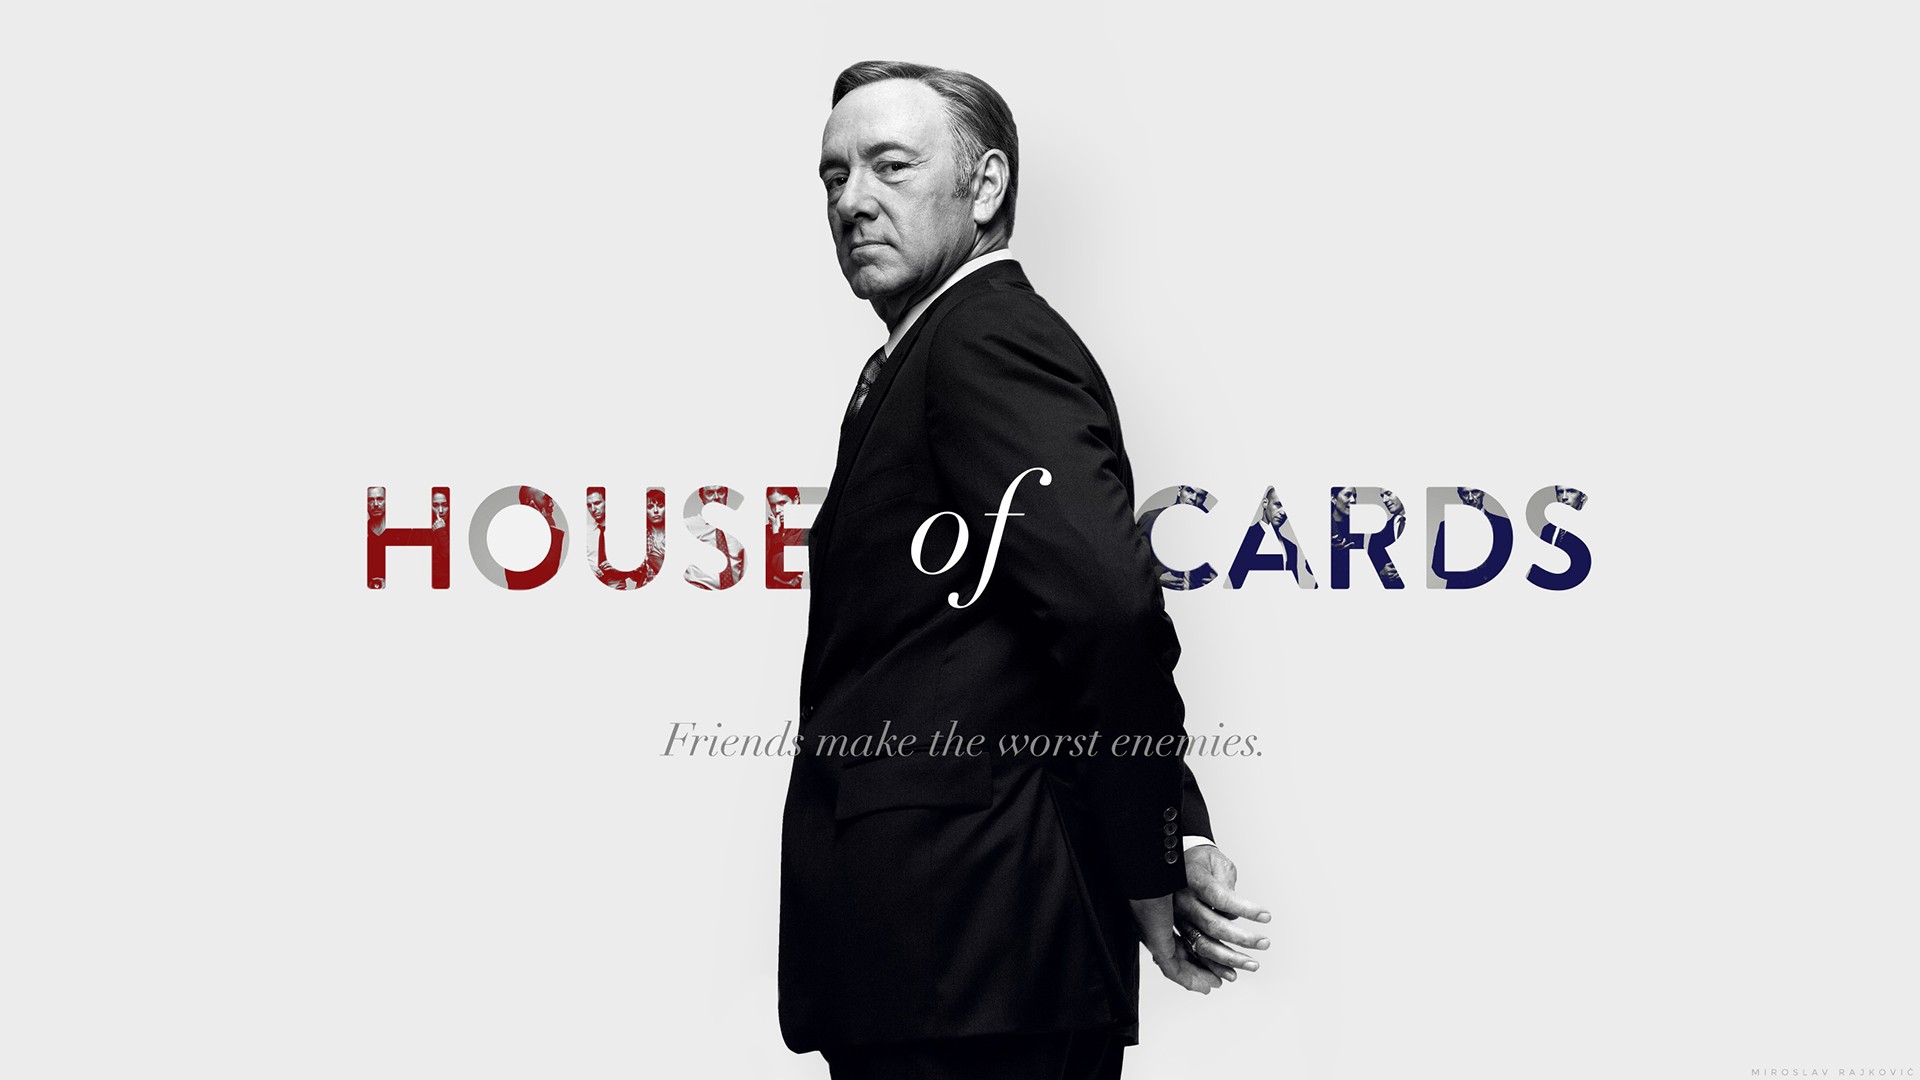 Frank Underwood, Kevin Spacey, Men, Looking at viewer, House of Cards, Quote, Simple background, Politics, TV, Typography Wallpaper